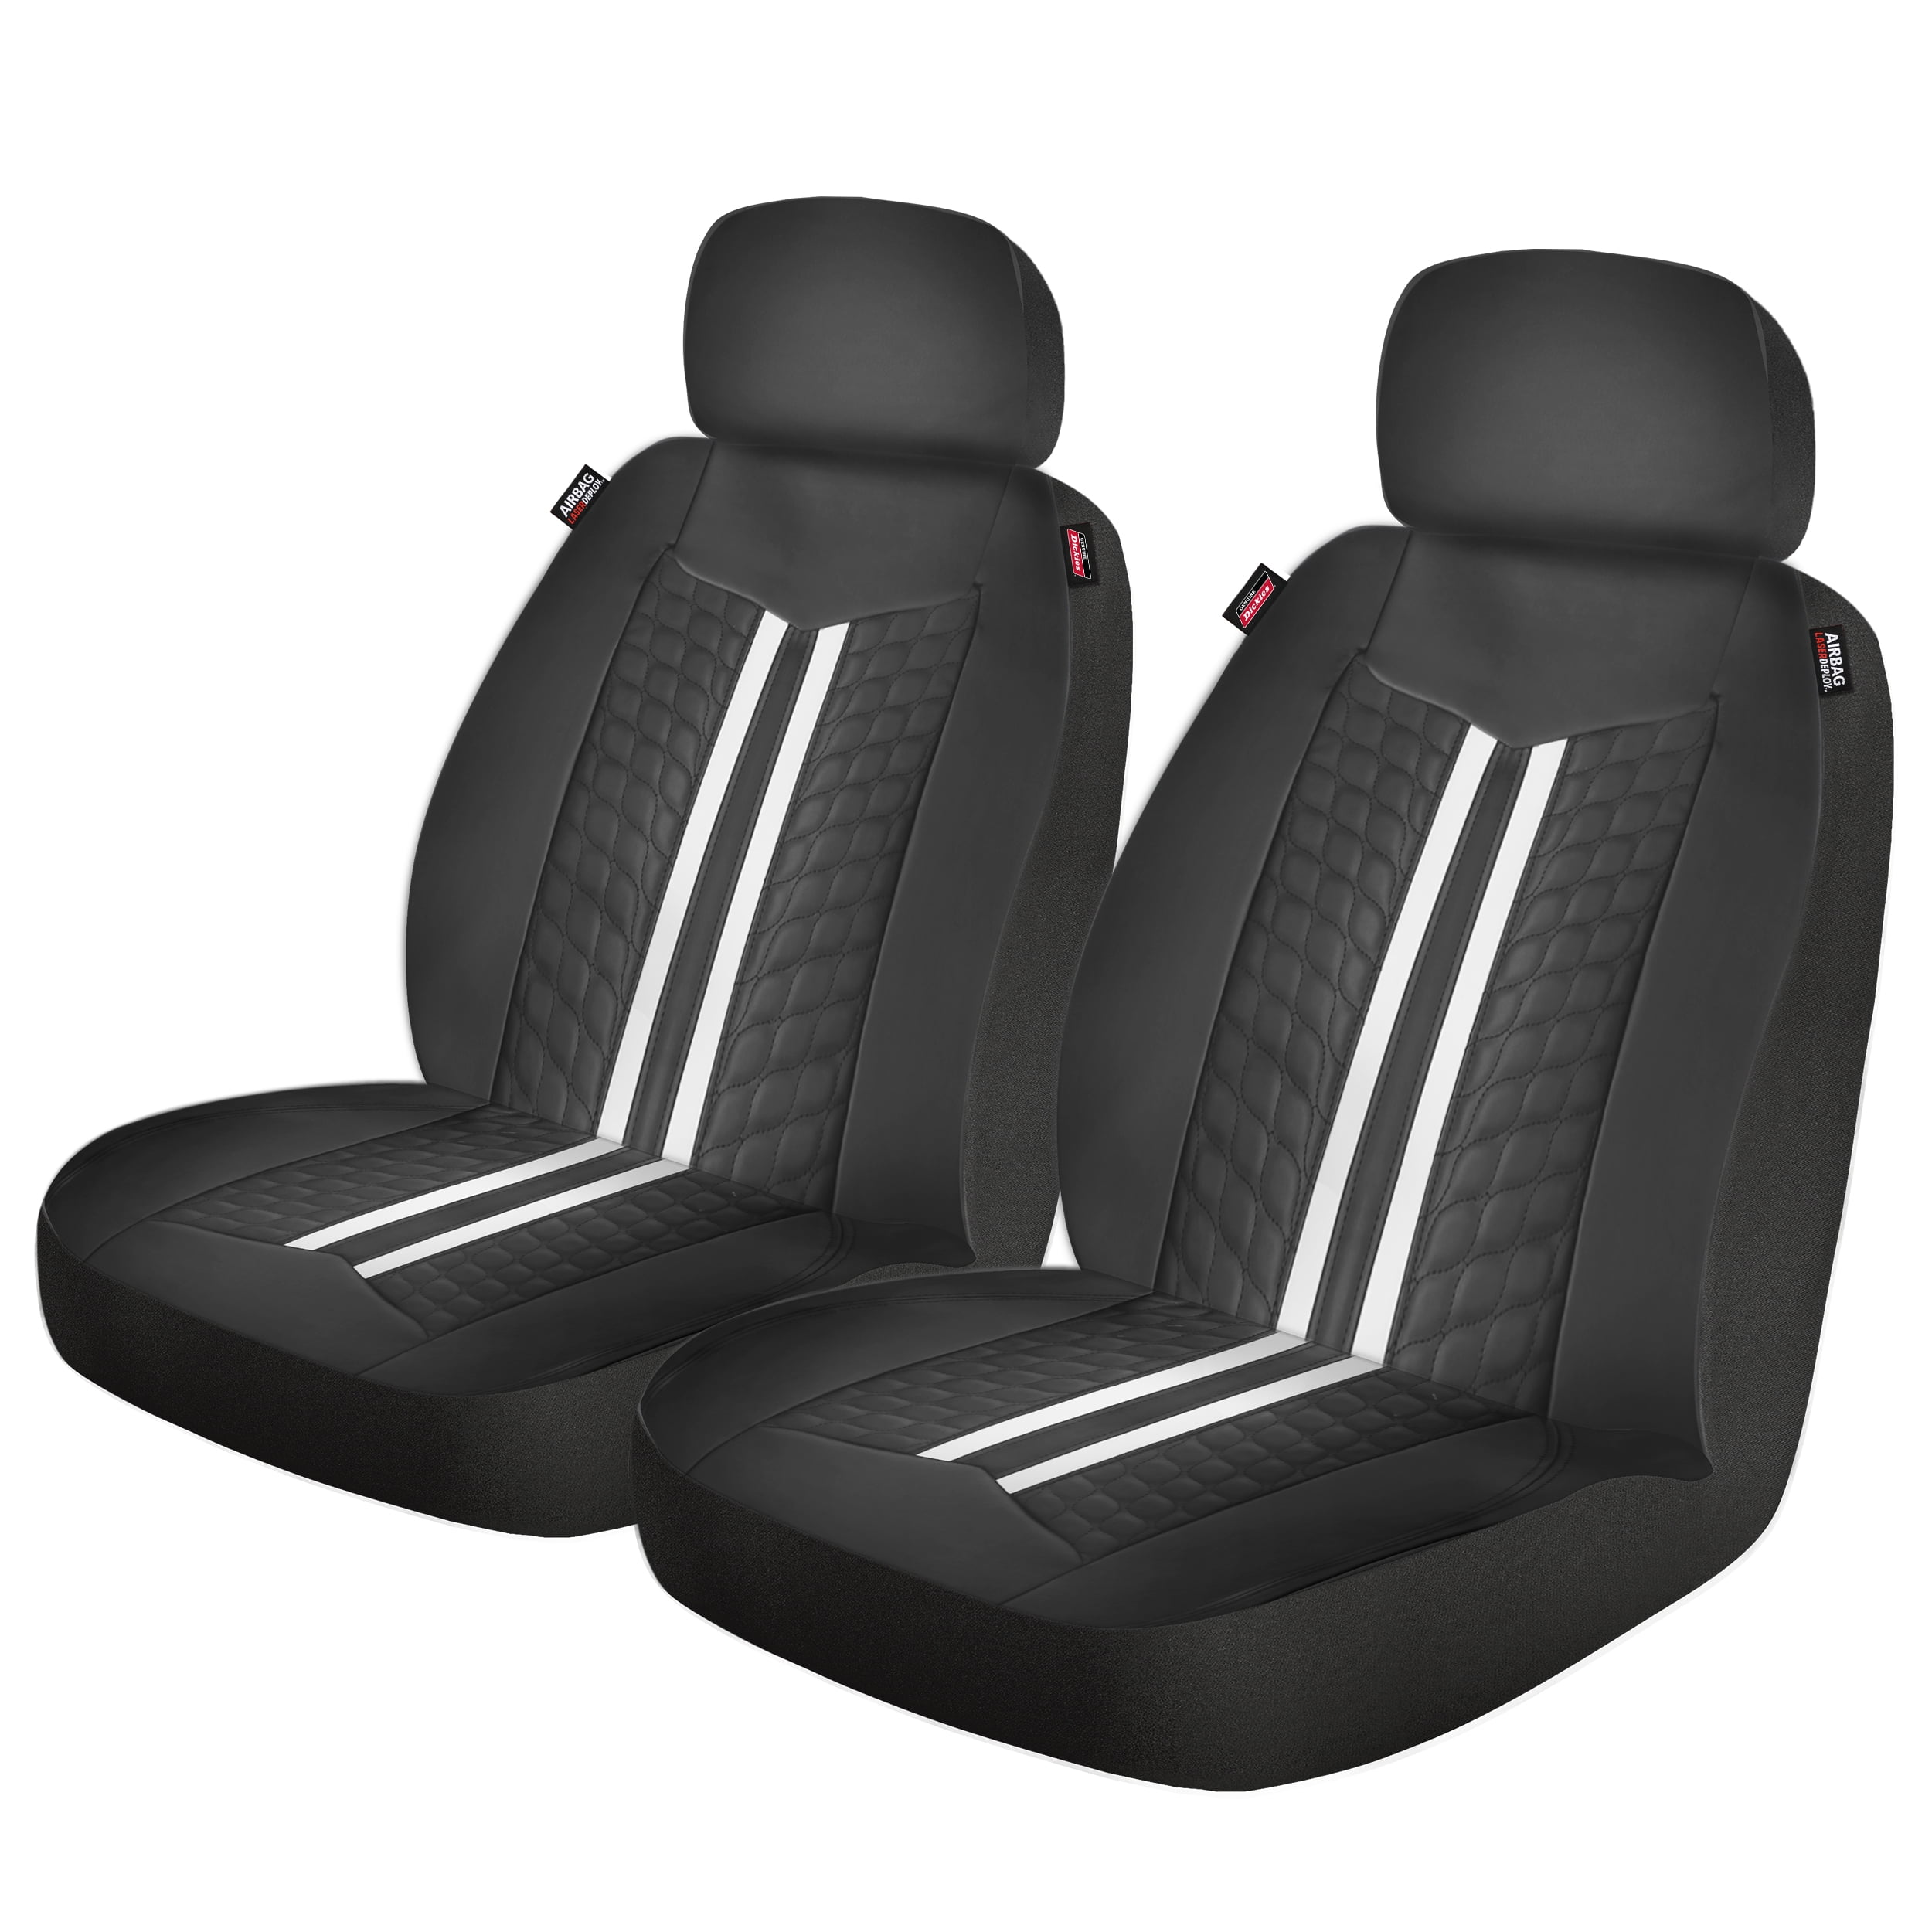 Genuine Dickies 2 Piece Classics Black Car Seat Covers fits Low Back Seats, 40219WDI